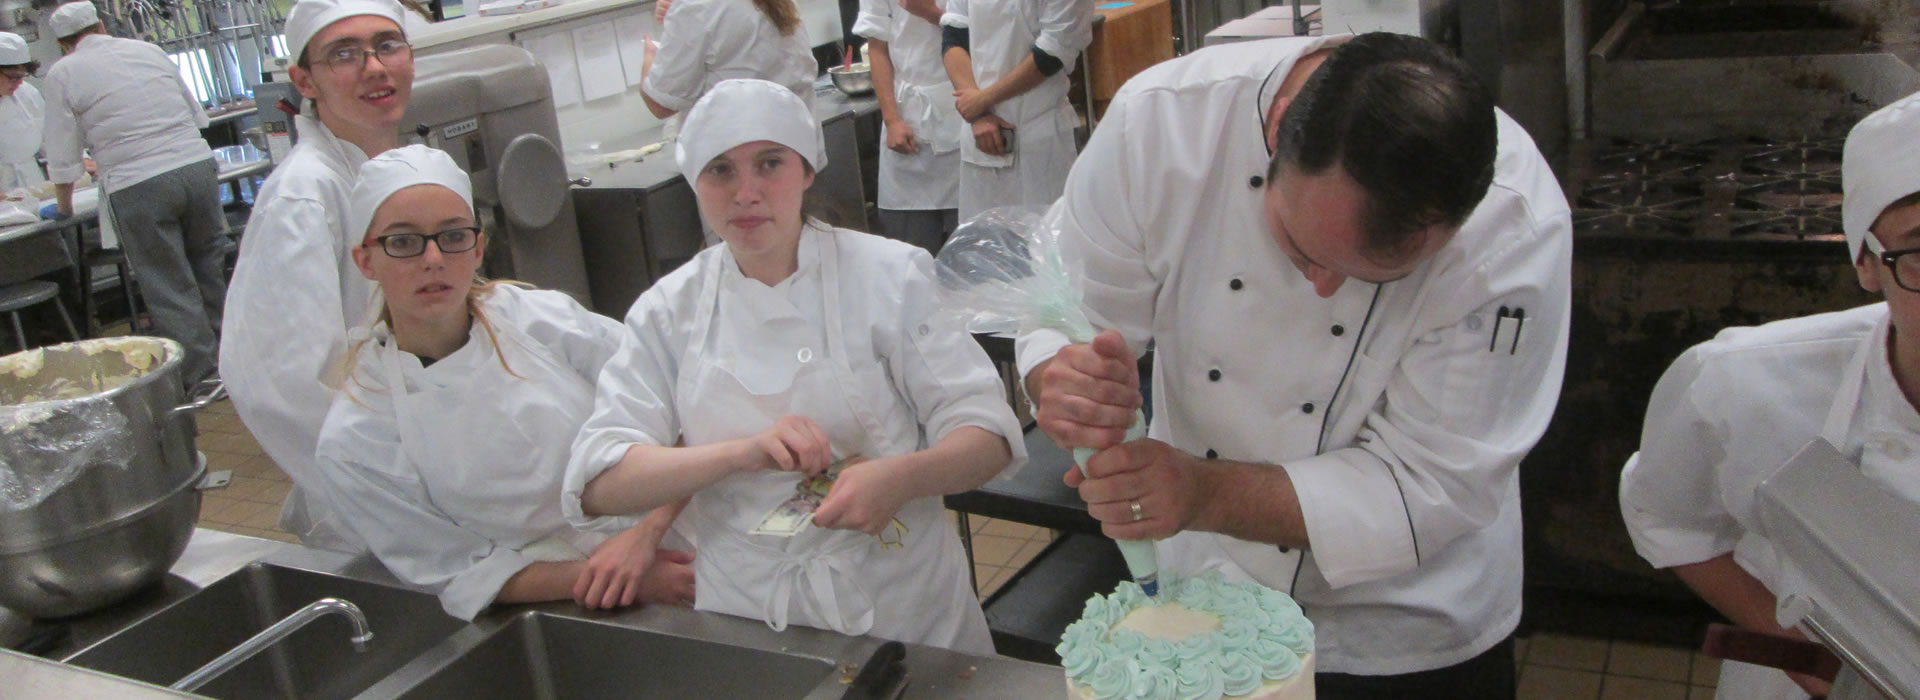 Culinary Art Management Students